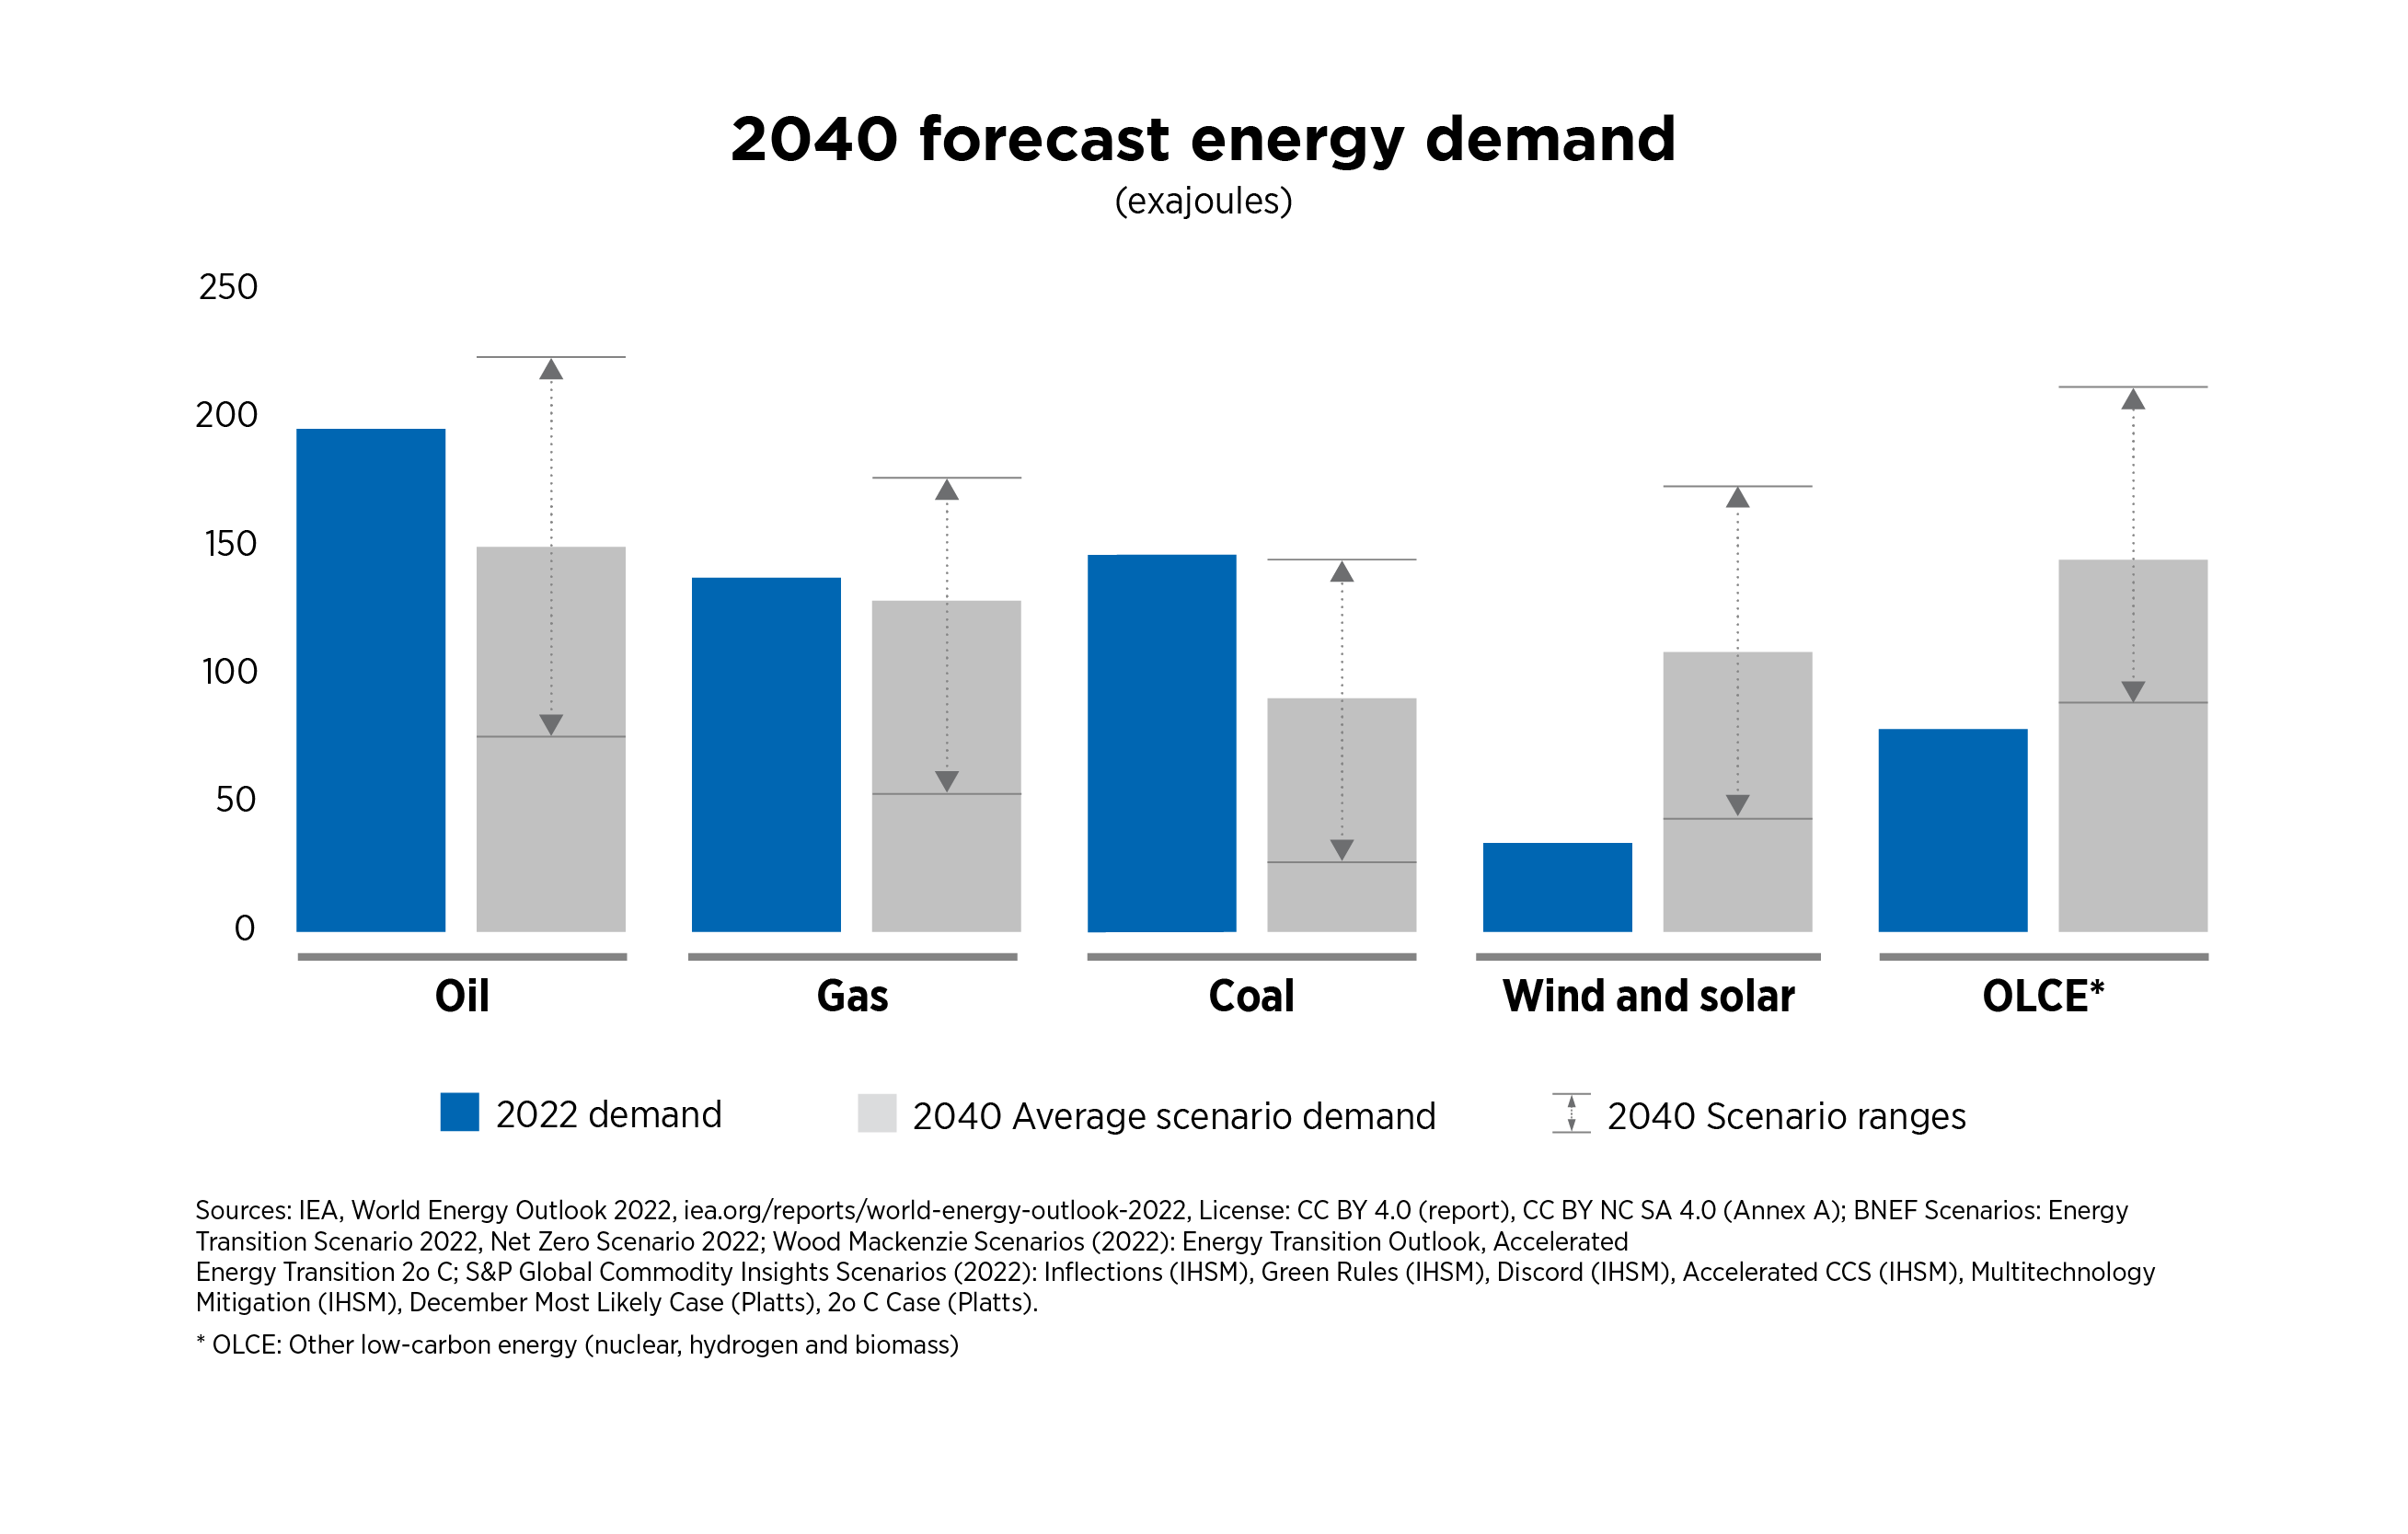 Whisker chart comparing 2022 energy demand to 2040 forecast range for selected energy sources. The average of 2040 scenarios energy demand compared to 2022 actual energy demand suggests an absolute decrease in oil, coal and gas and an absolute increase in wind & solar and other low carbon energies. 